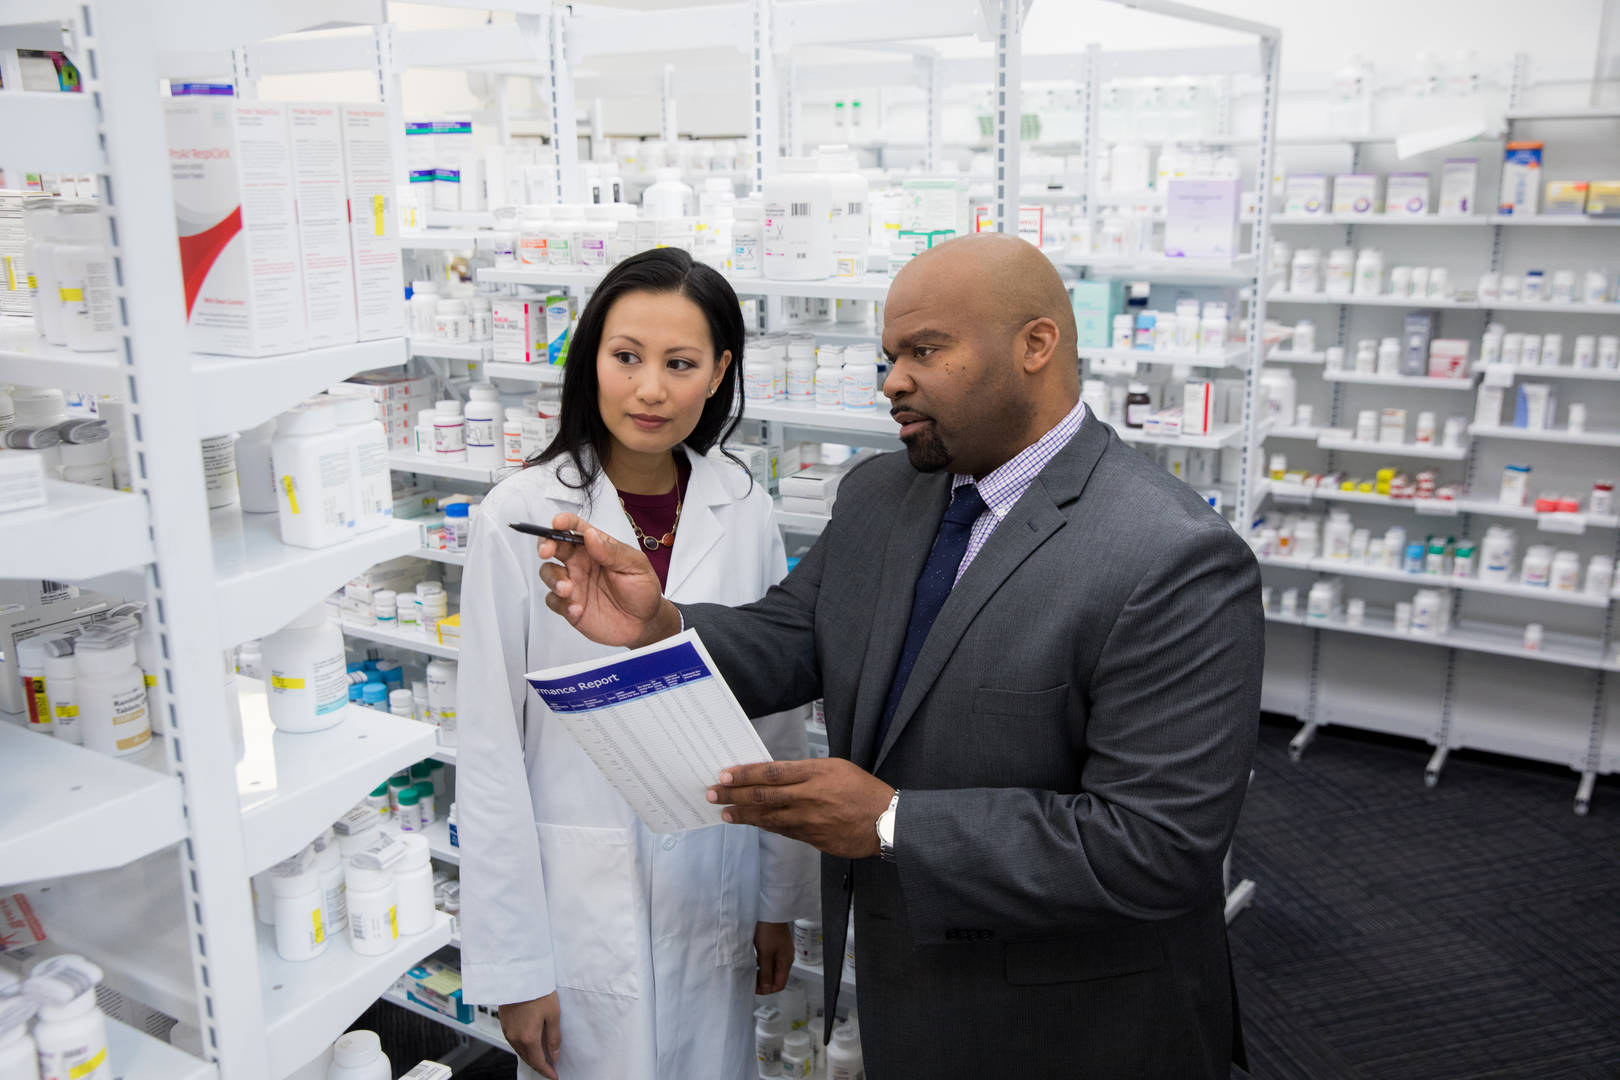 A Good Neighbor Pharmacy business coach reviews inventory behind the counter with a pharmacist